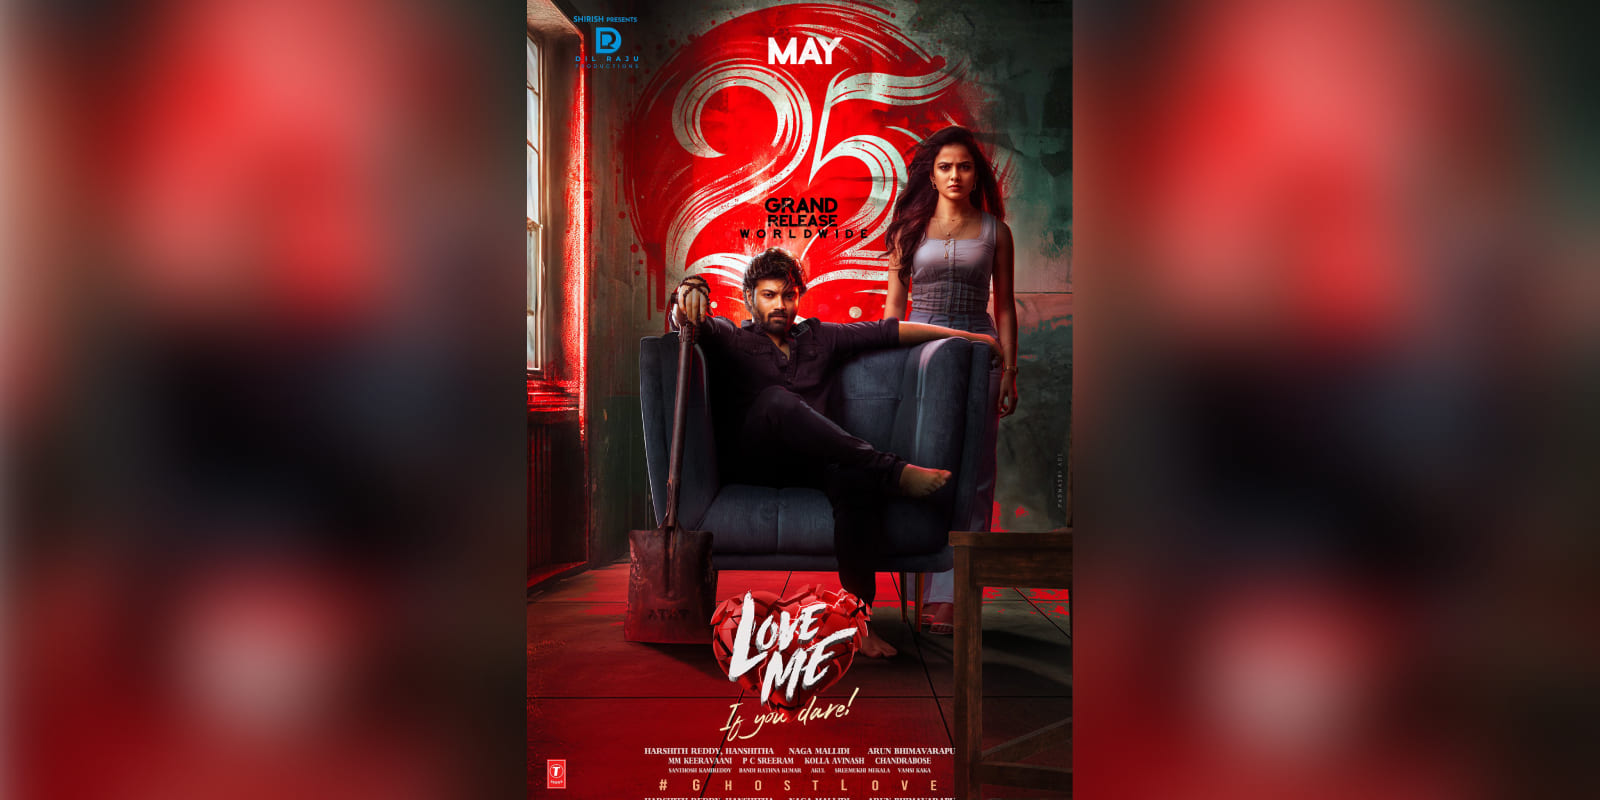 Love Me If You Dare will be released on 25 May